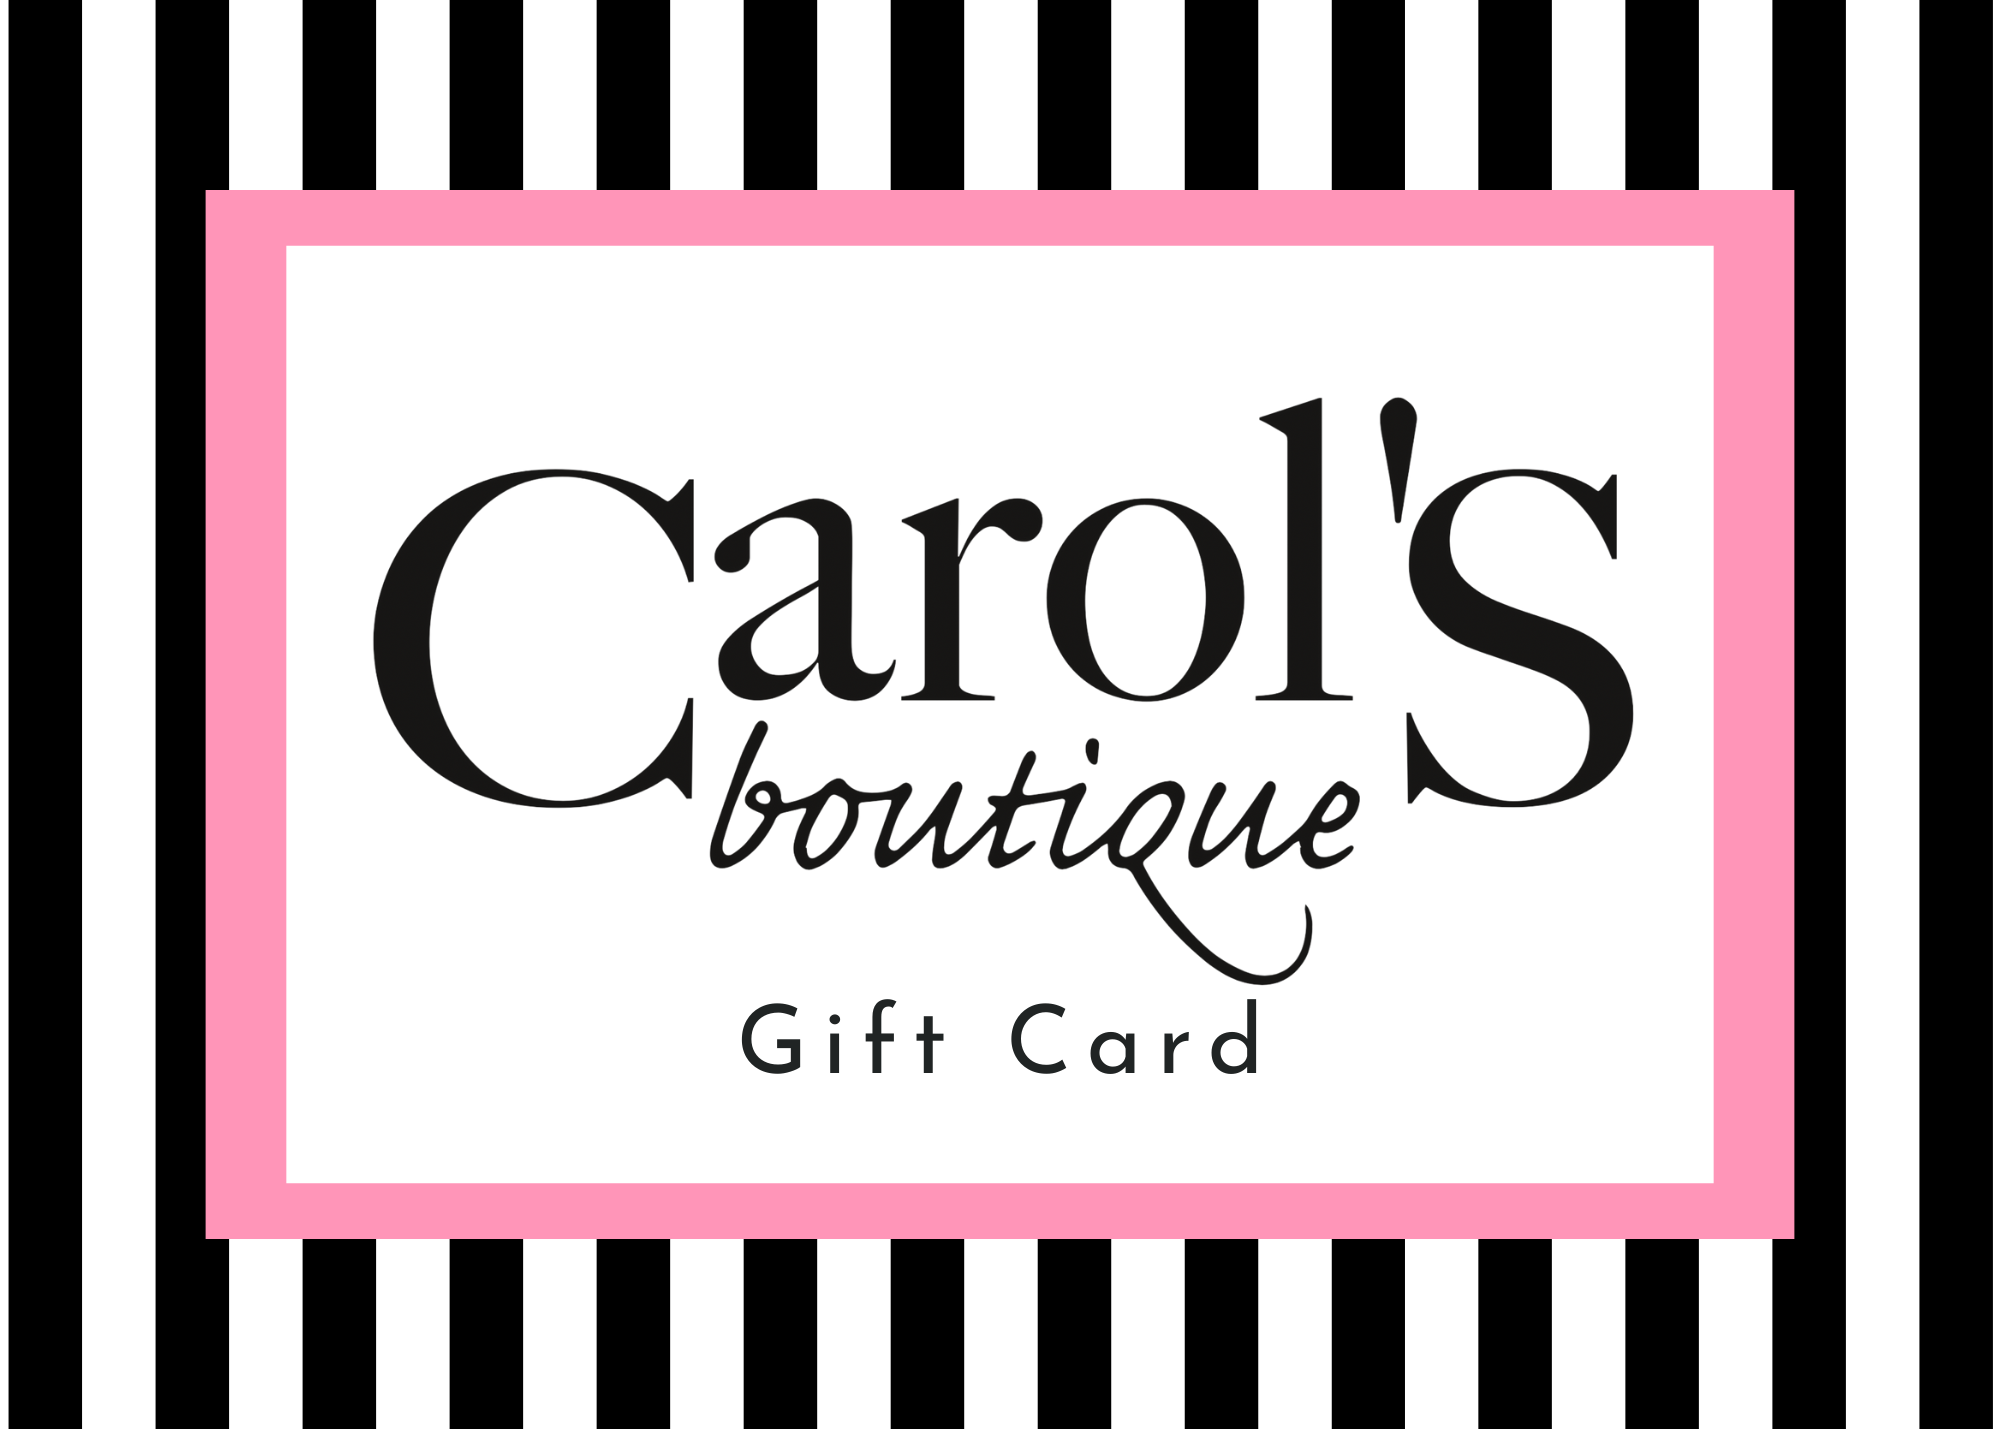 Gift Card  carol's boutique   